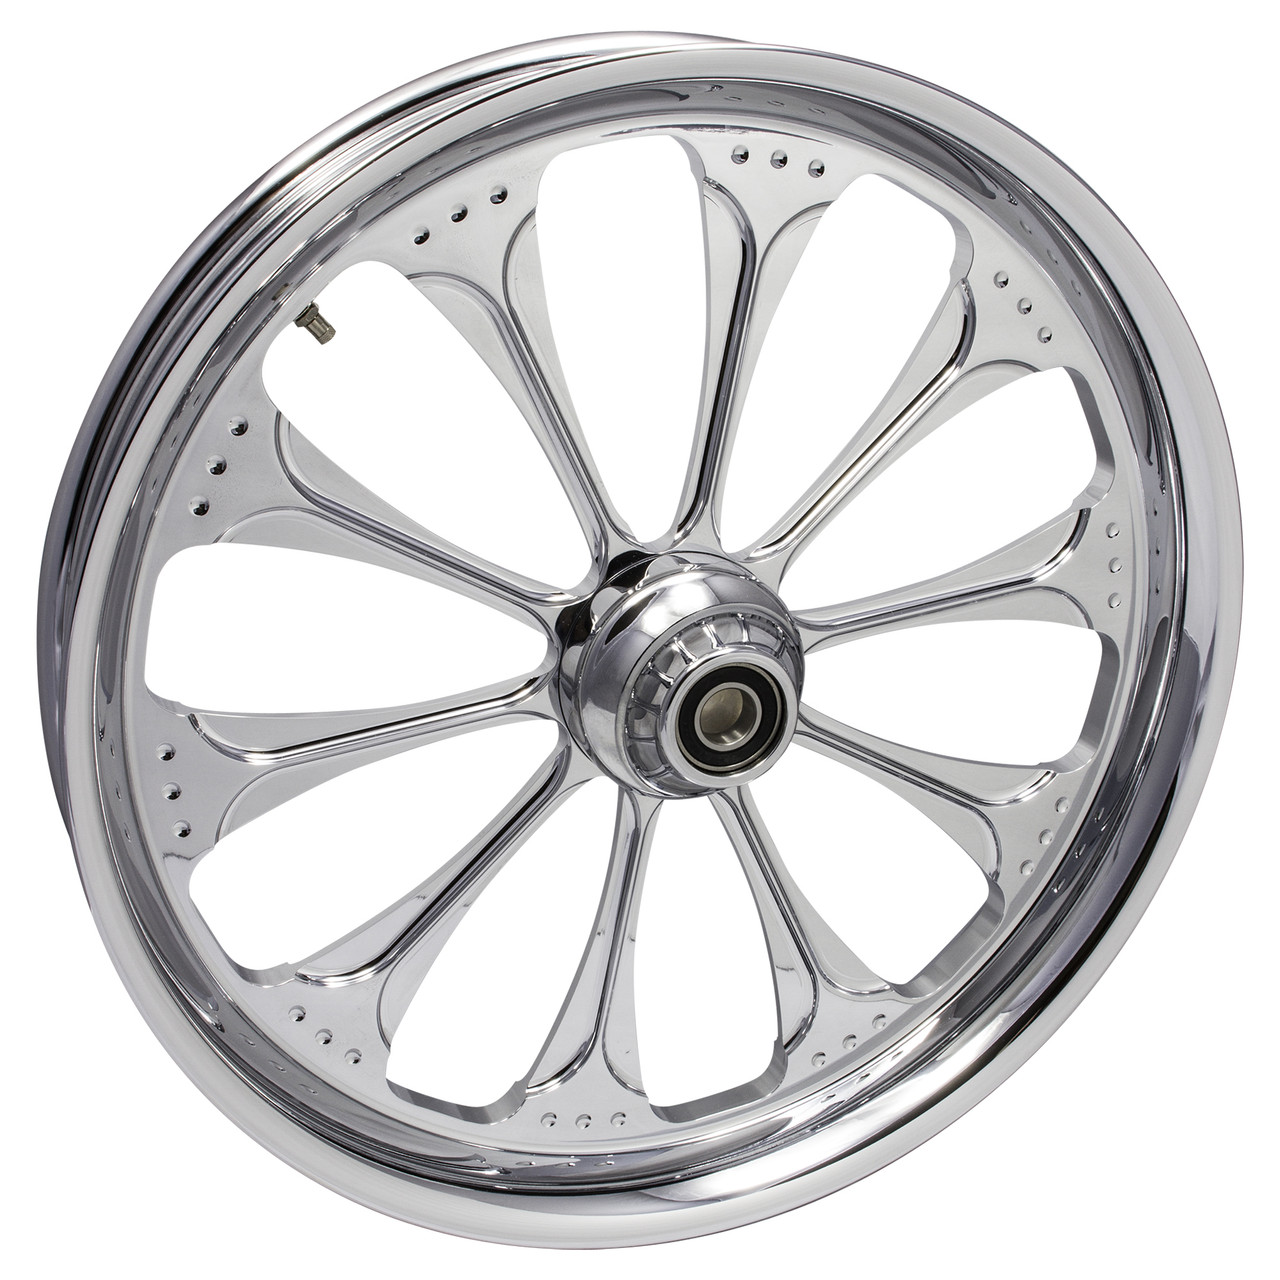 21 inch Fat Front Wheel Chrome Wizard